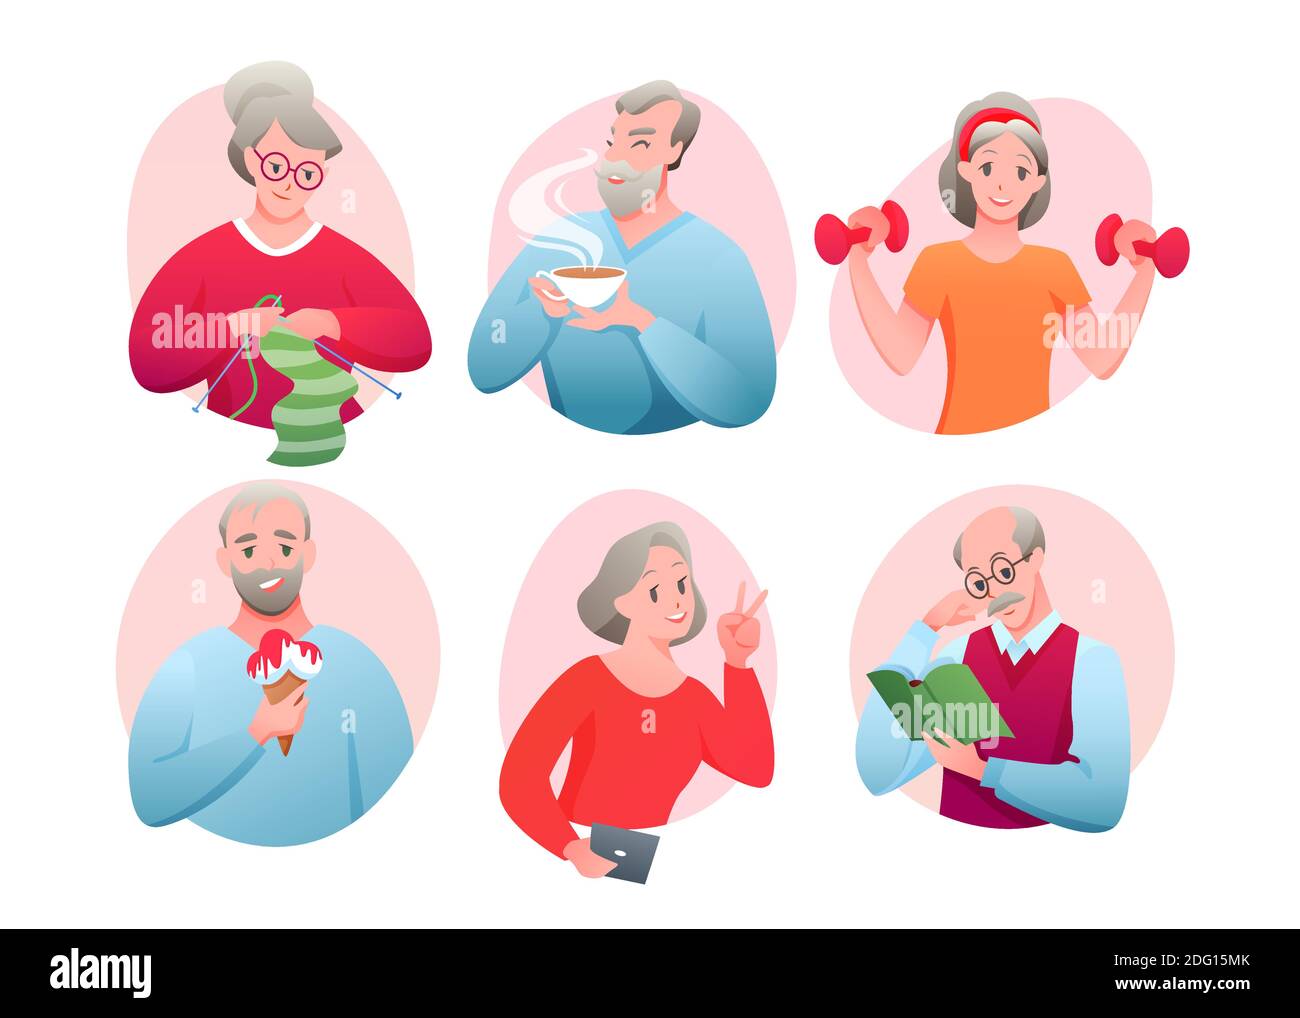 Cartoon round avatars of active old character doing sport exercise, knitting, networking, eating ice cream, drinking tea, reading book. Senior people Stock Vector